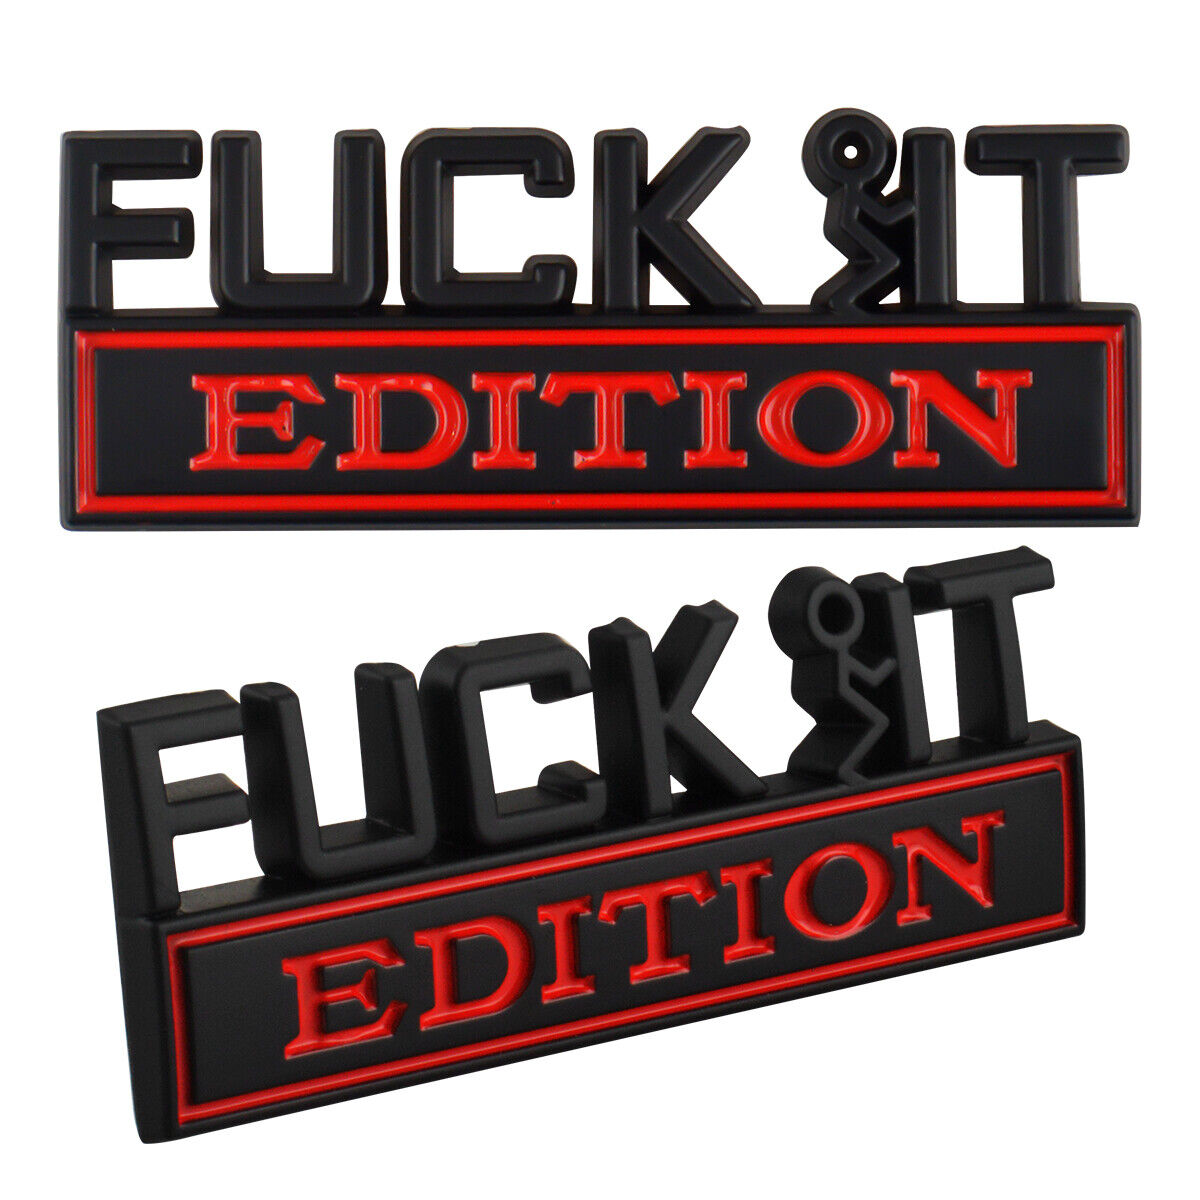 2PC F*CK IT GUY EDITION Black Red emblem Badges fits Chevy Silver Ford Car Truck